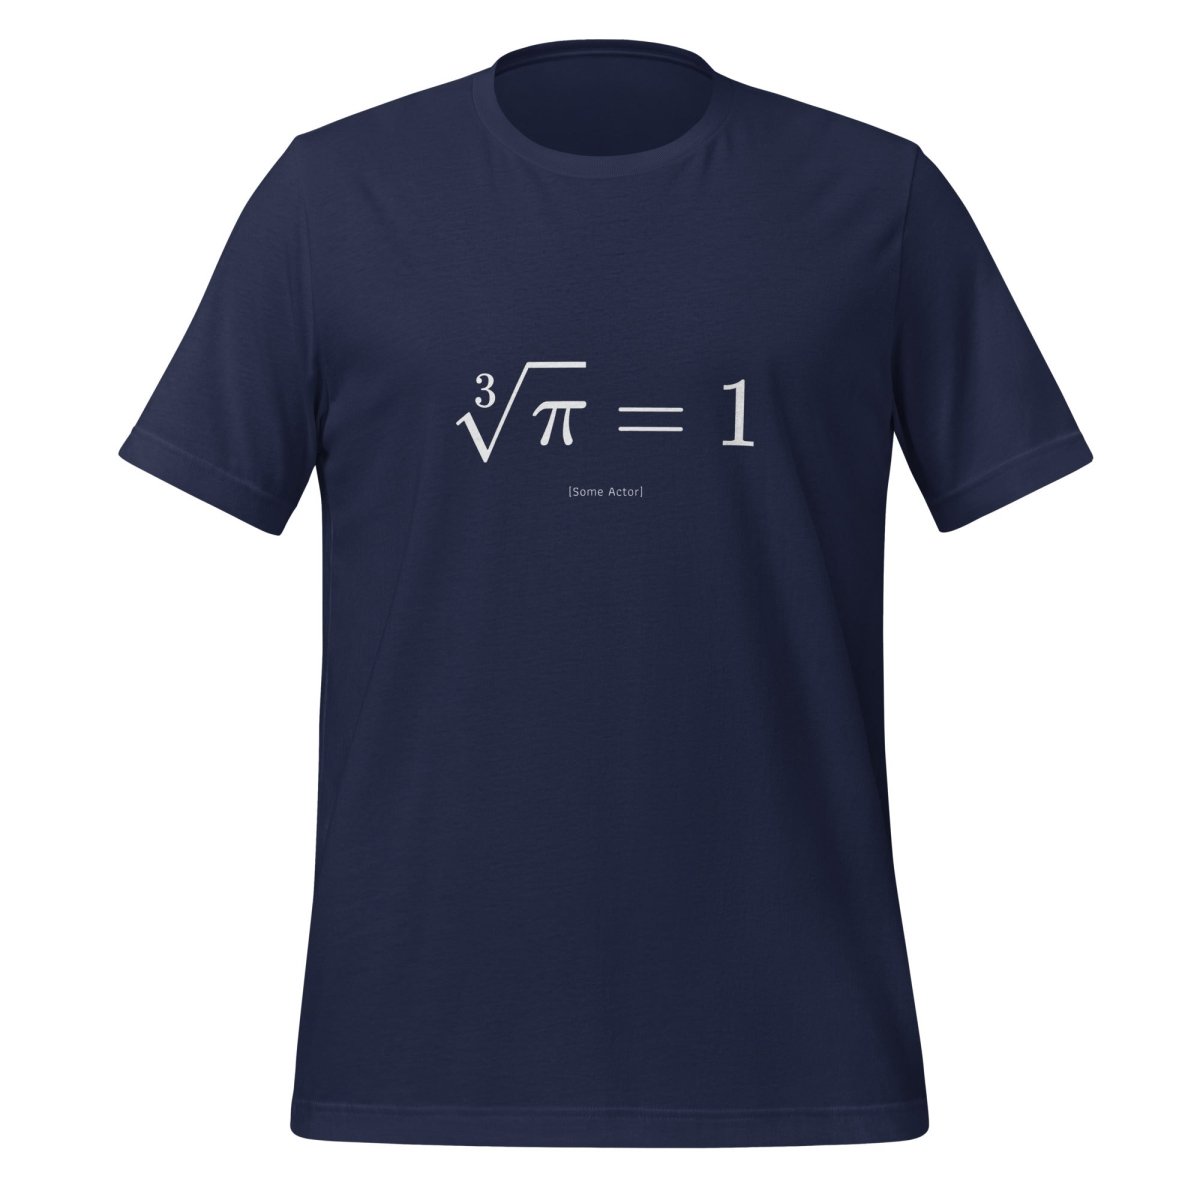 The Cube Root of Pi Equals 1 T - Shirt (unisex) - Navy - AI Store